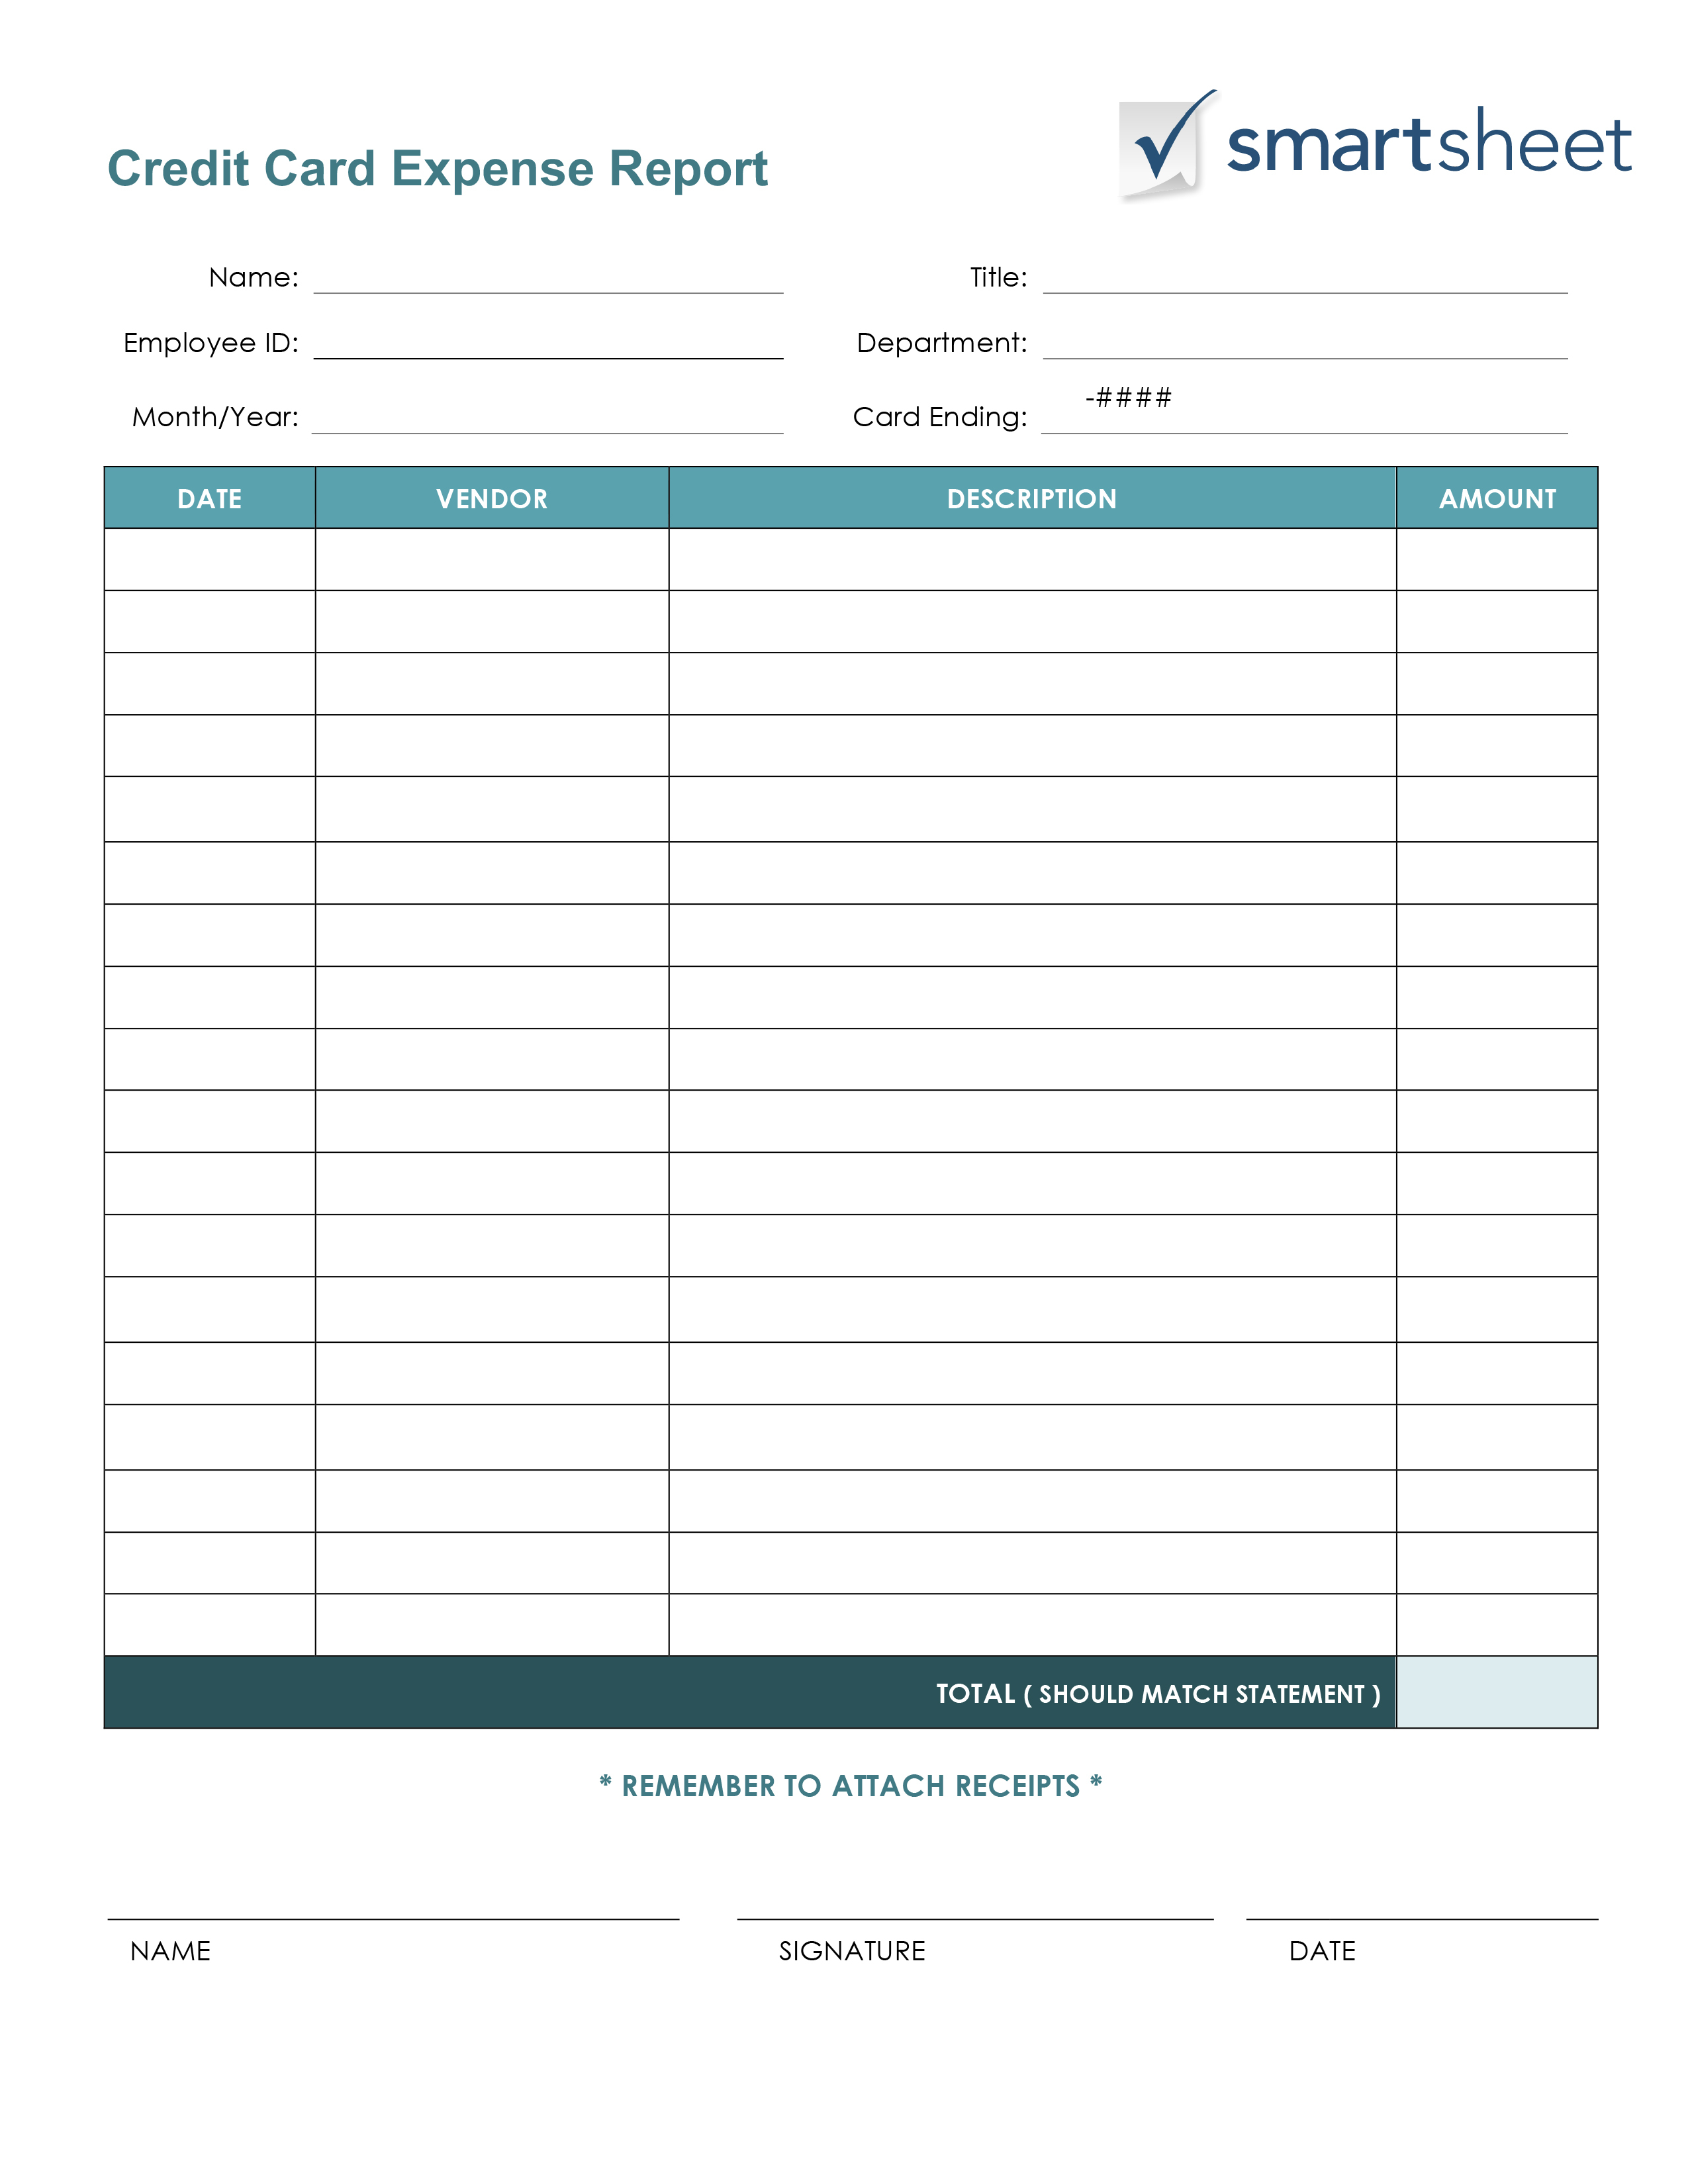 Microsoft Word Spreadsheet Download Simple | Papillon Northwan Intended For Simple Spreadsheet Download